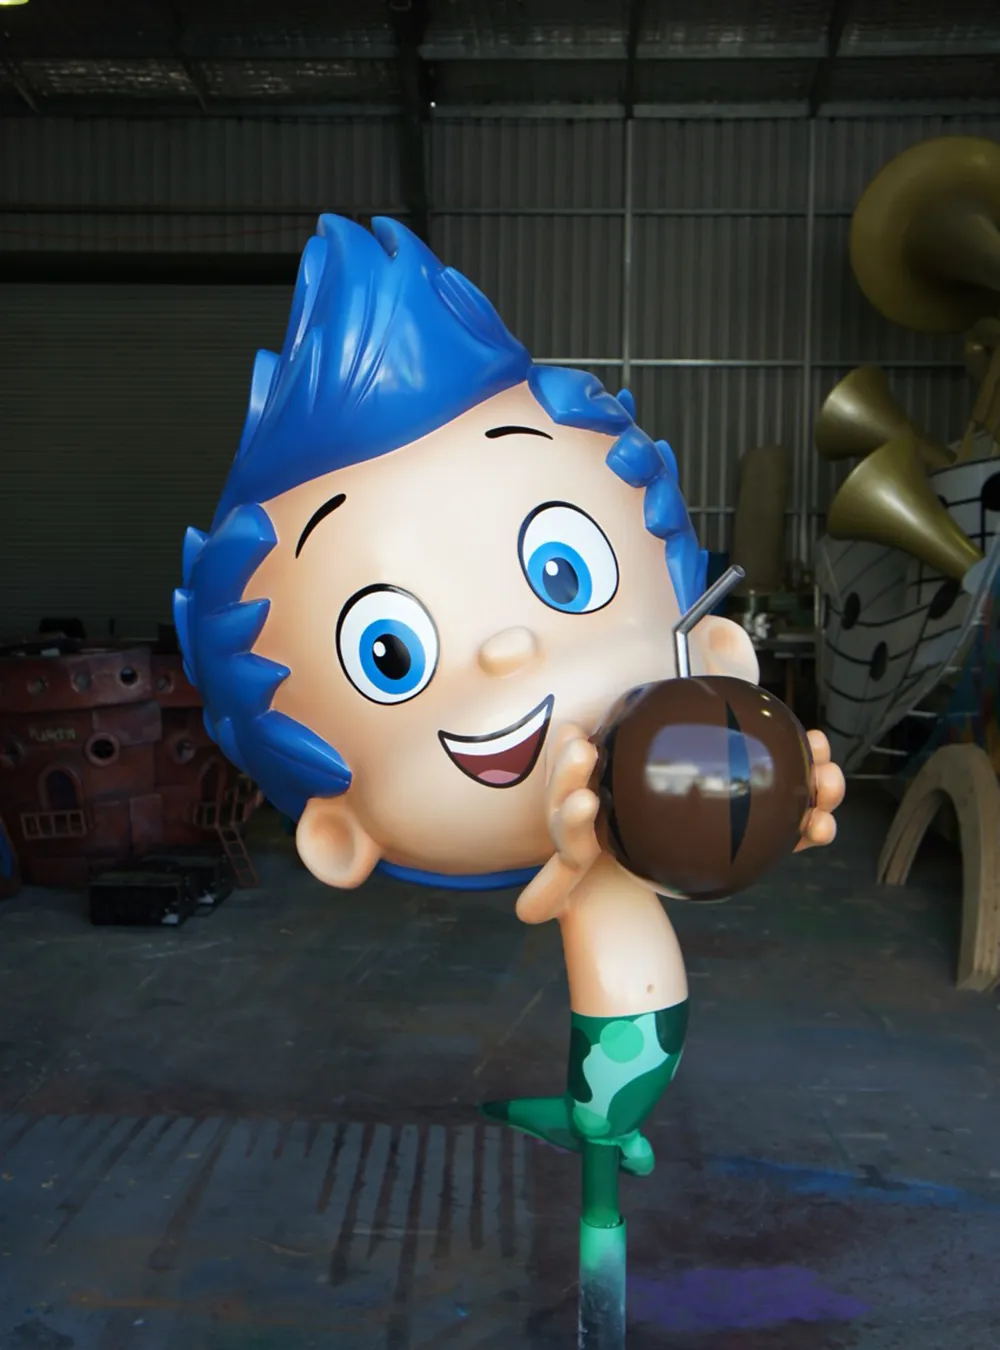 Bright and playful sculpture of a young boy character with blue hair, excitedly holding a coconut drink, set against the backdrop of a workshop, created by Sculpt Studios.